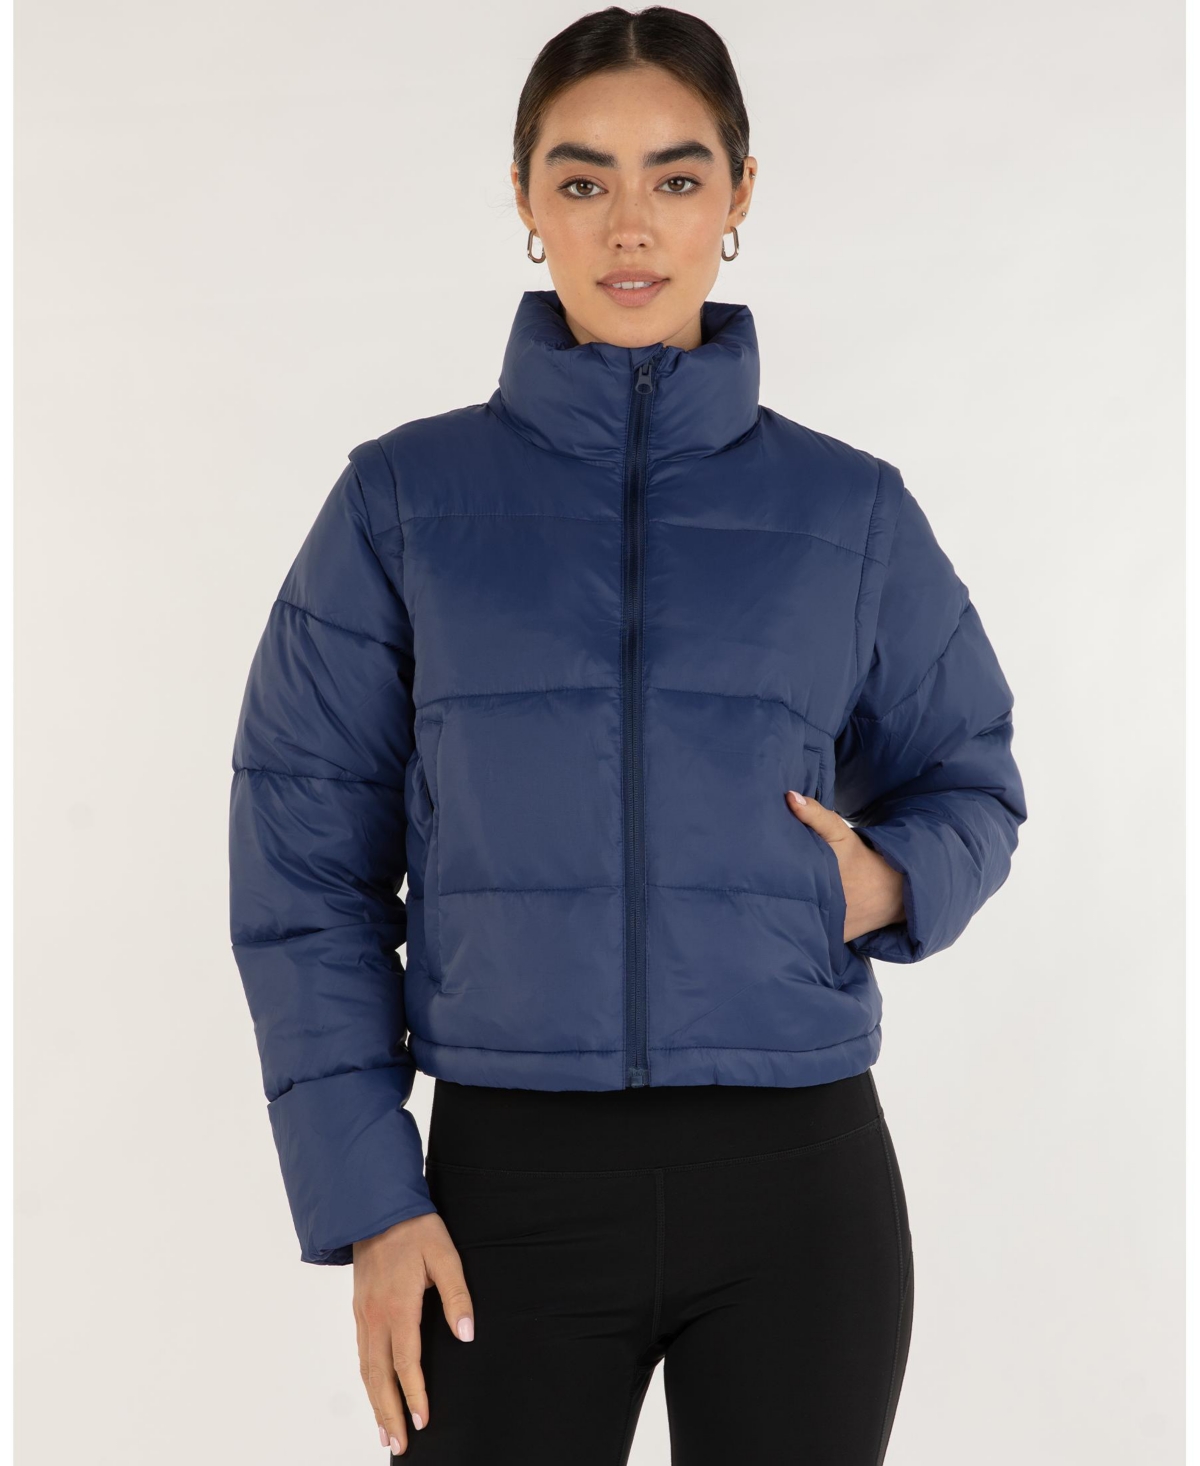 Women's On The Go Puffer Convertible Jacket Vest for Women - Electric Blue